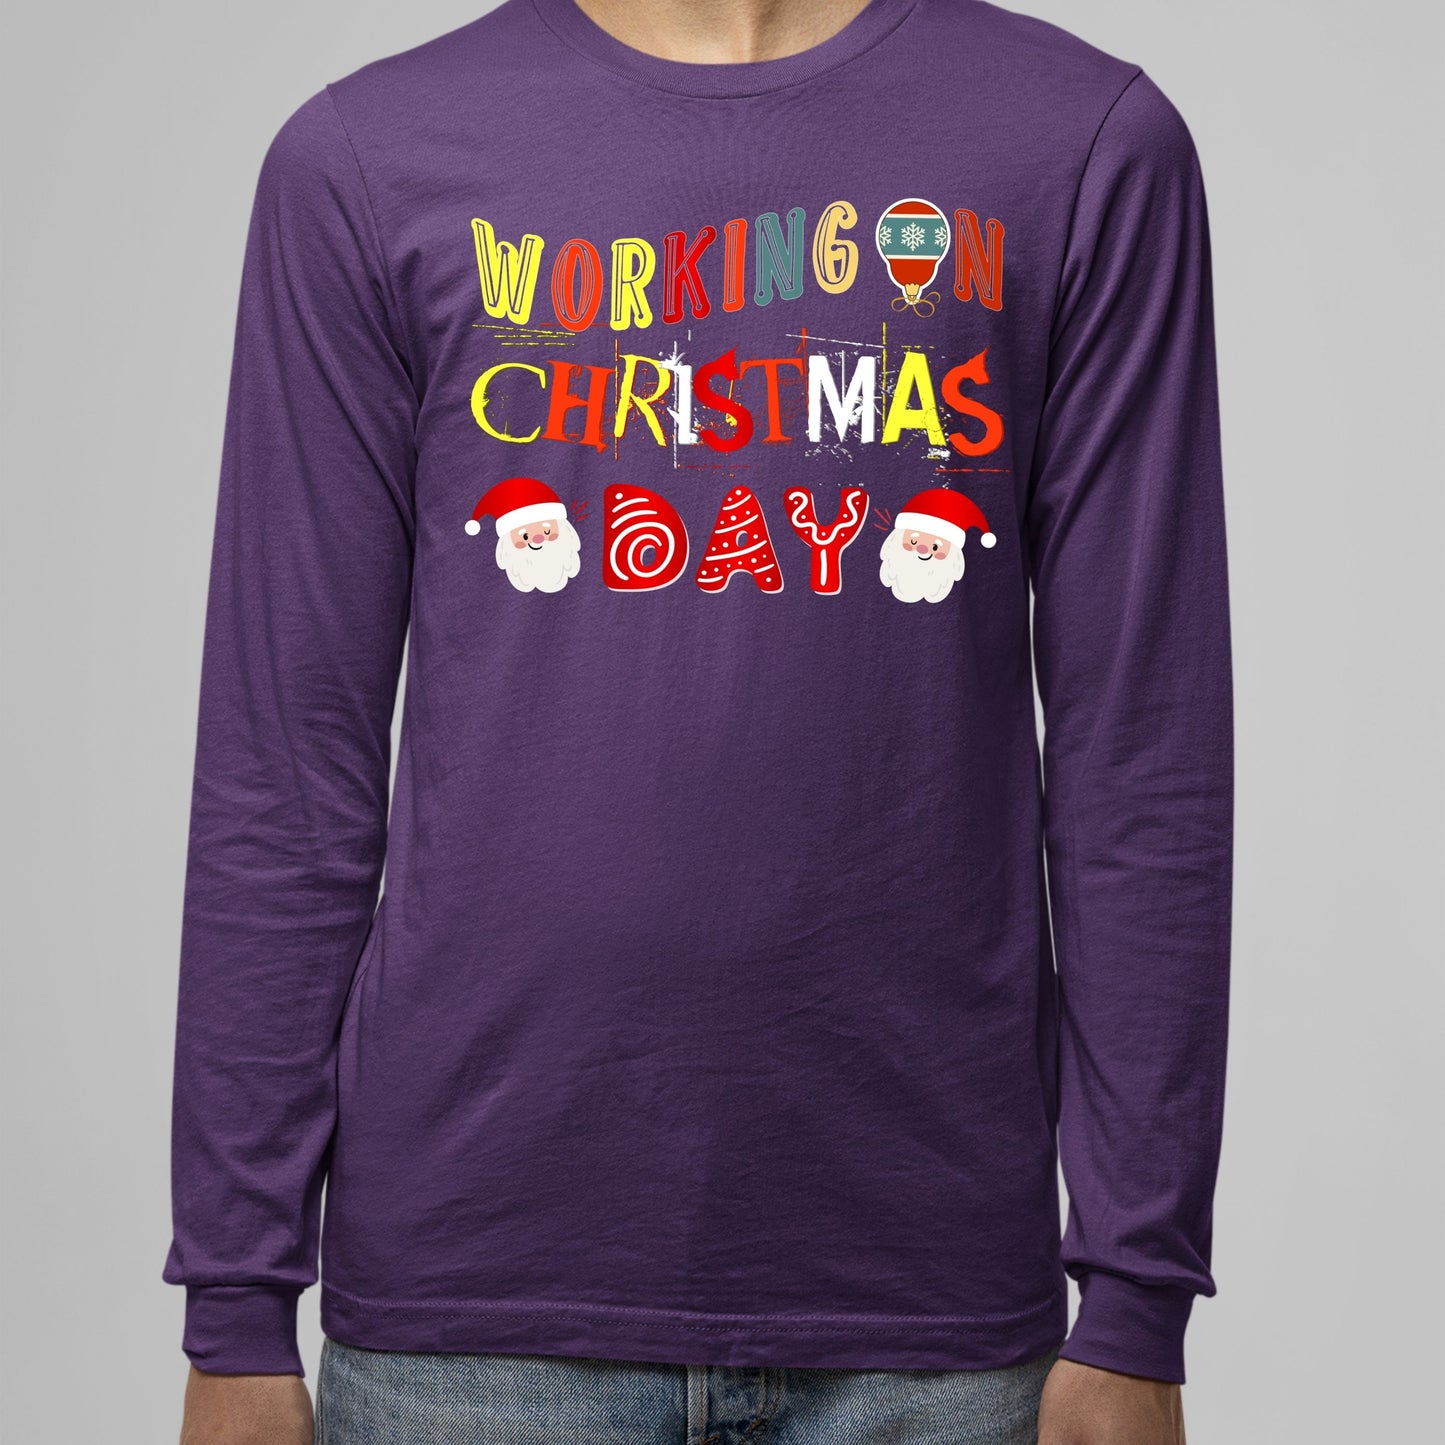 Working on Chirstmas day , Christmas Sweatshirt,  School TShirt, Christmas Shirt, Doctor Shirt, 2022 Christmas, Doctor Gift for Him,